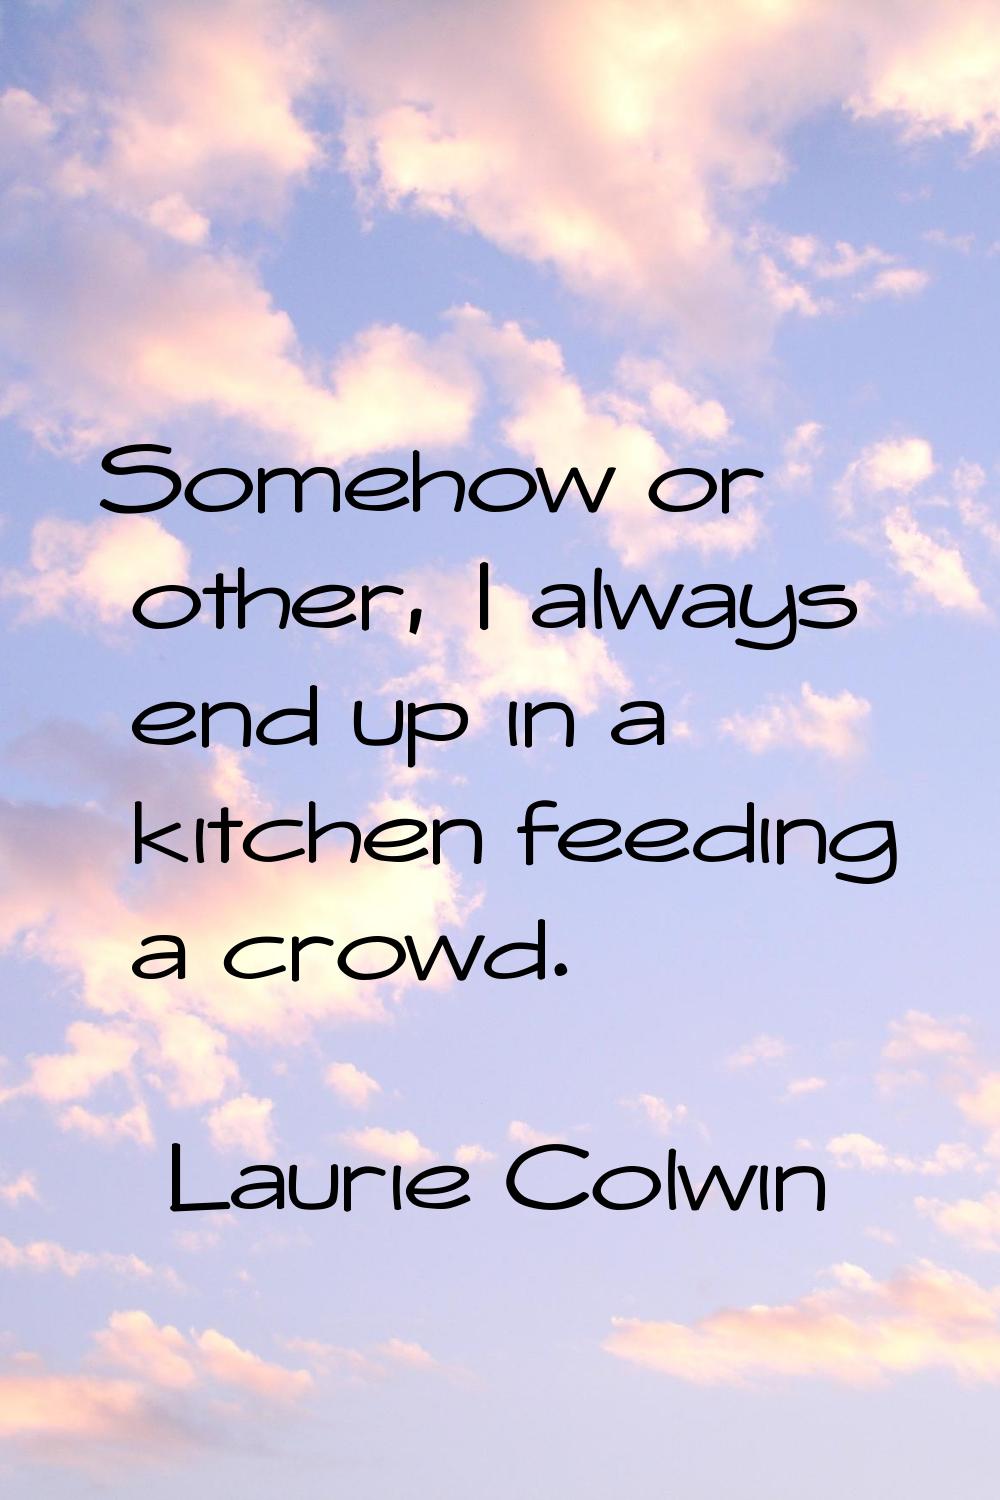 Somehow or other, I always end up in a kitchen feeding a crowd.